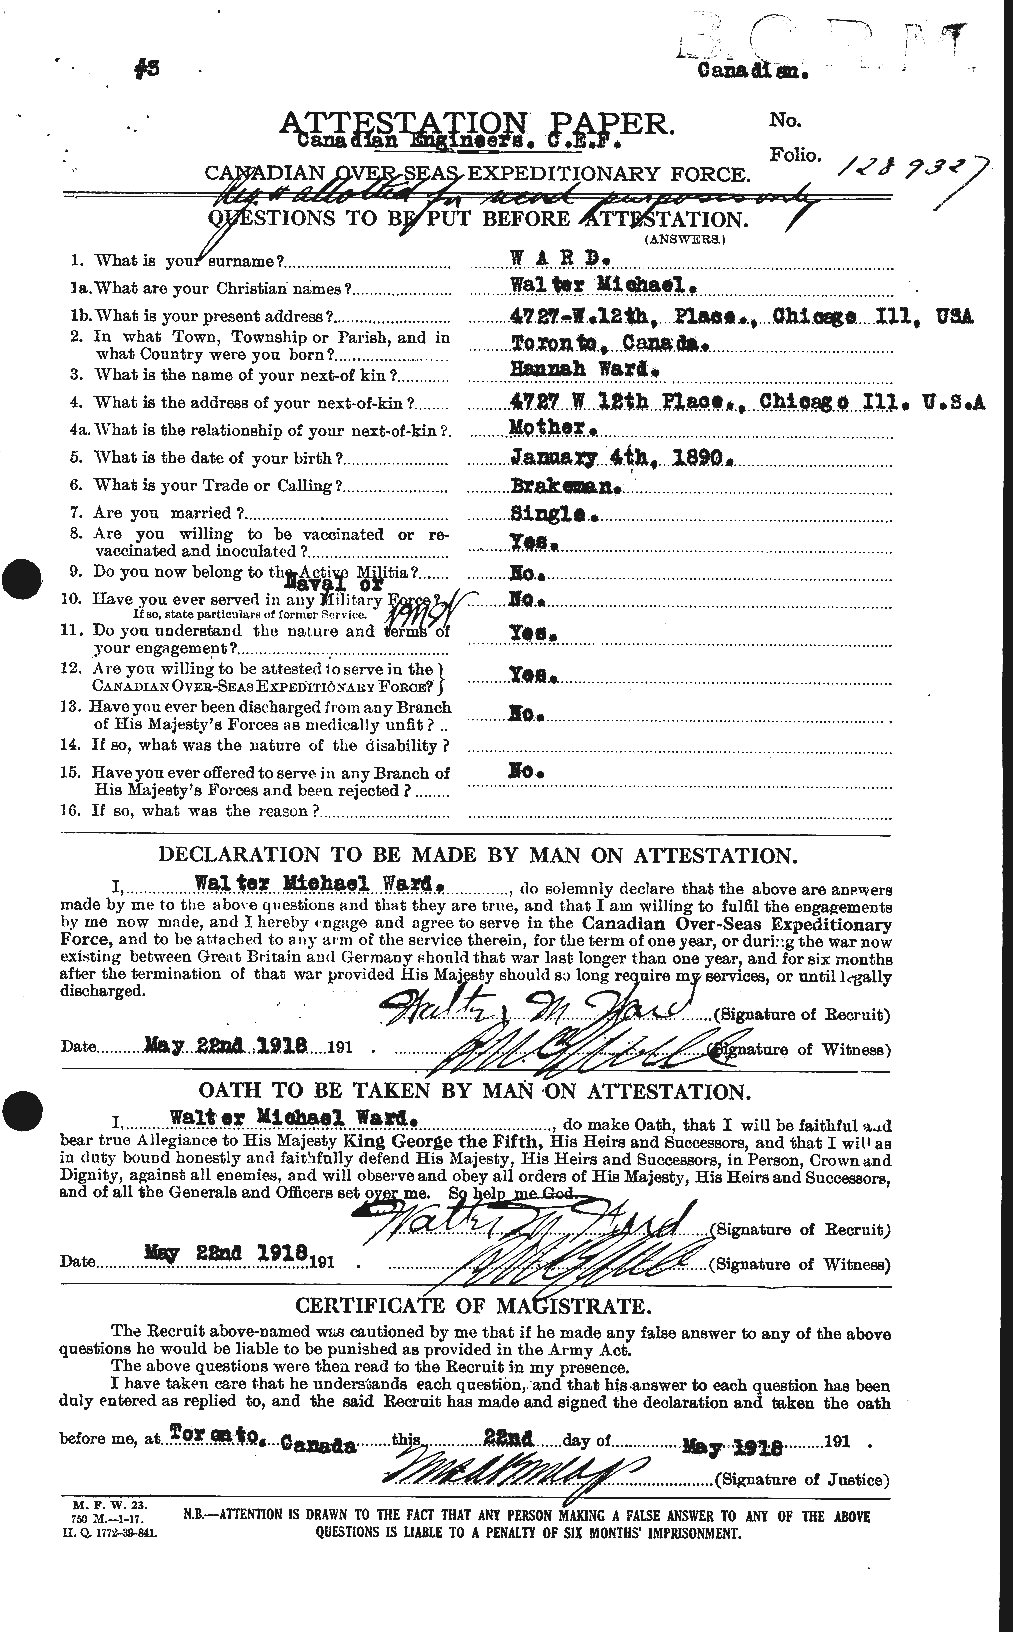 Personnel Records of the First World War - CEF 659759a